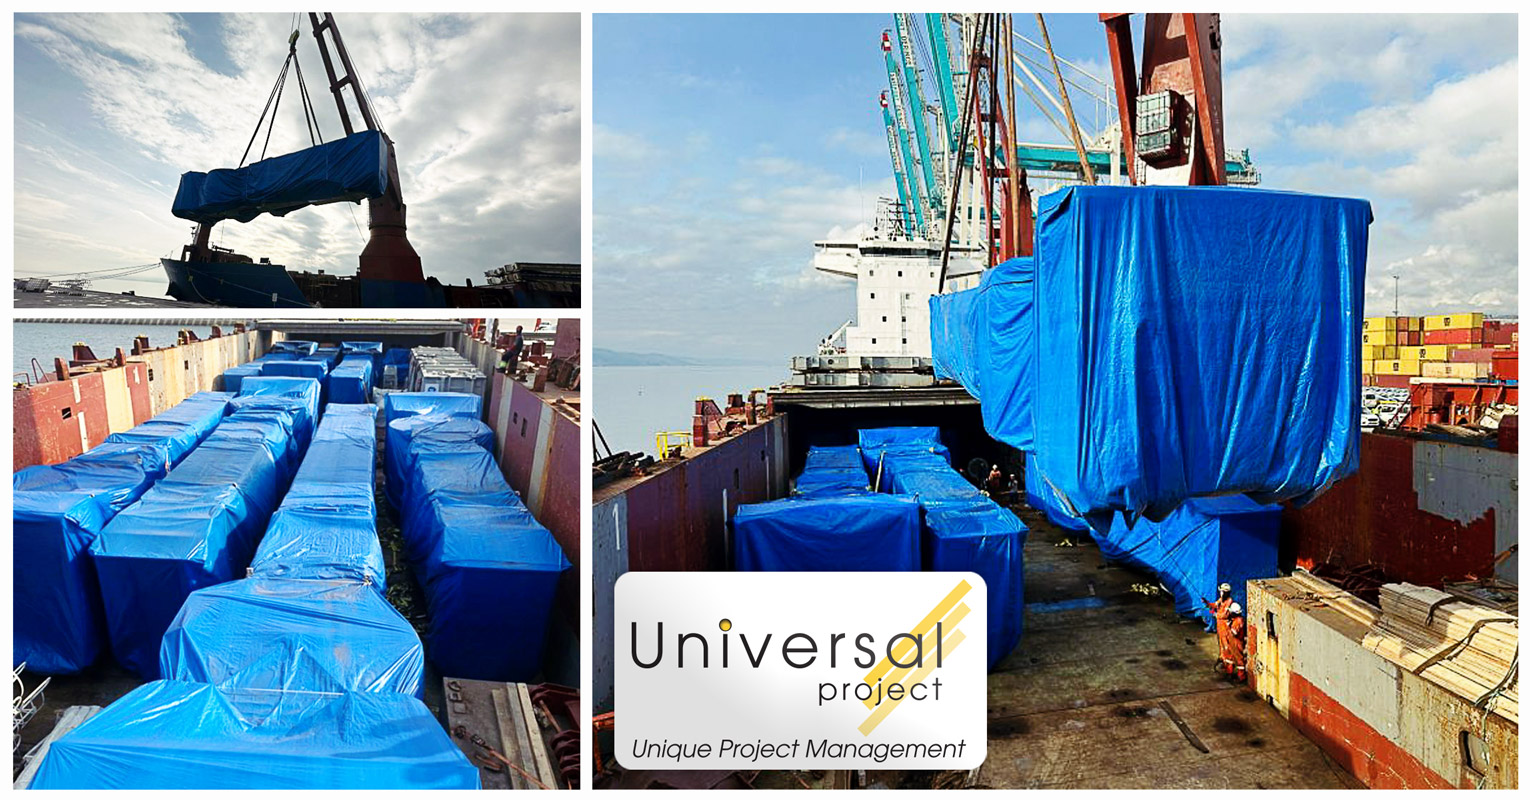 Universal Project Shipped Breakbulk Cargo from the Marmara Sea to West Africa